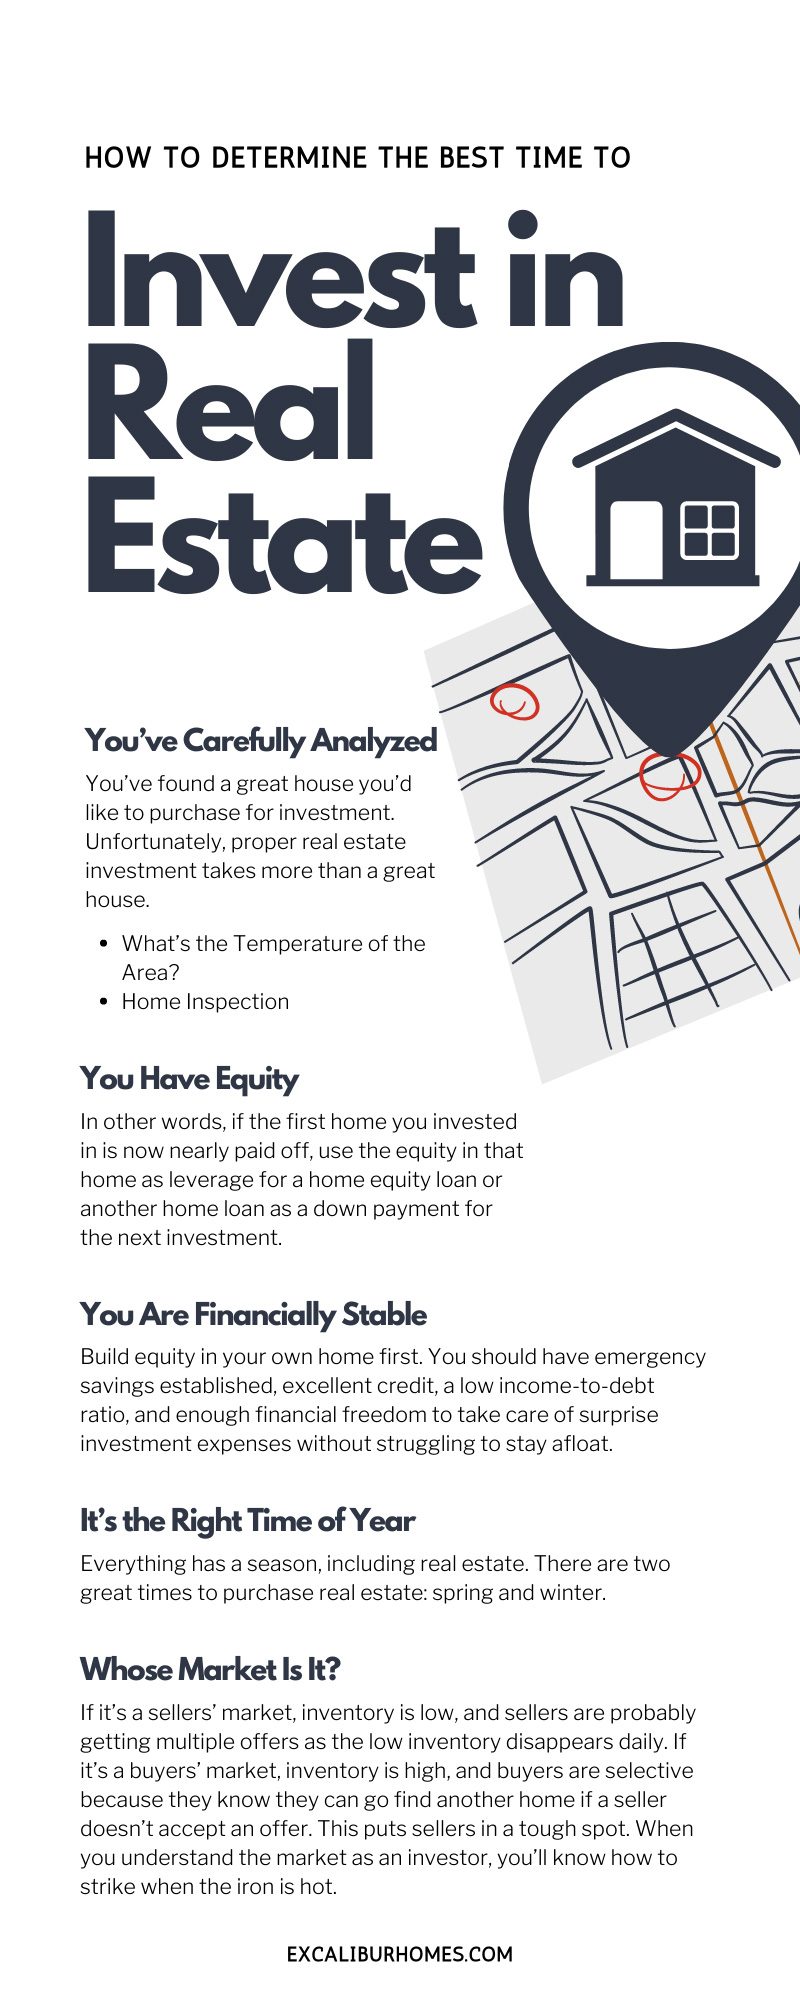 How To Determine the Best Time To Invest in Real Estate